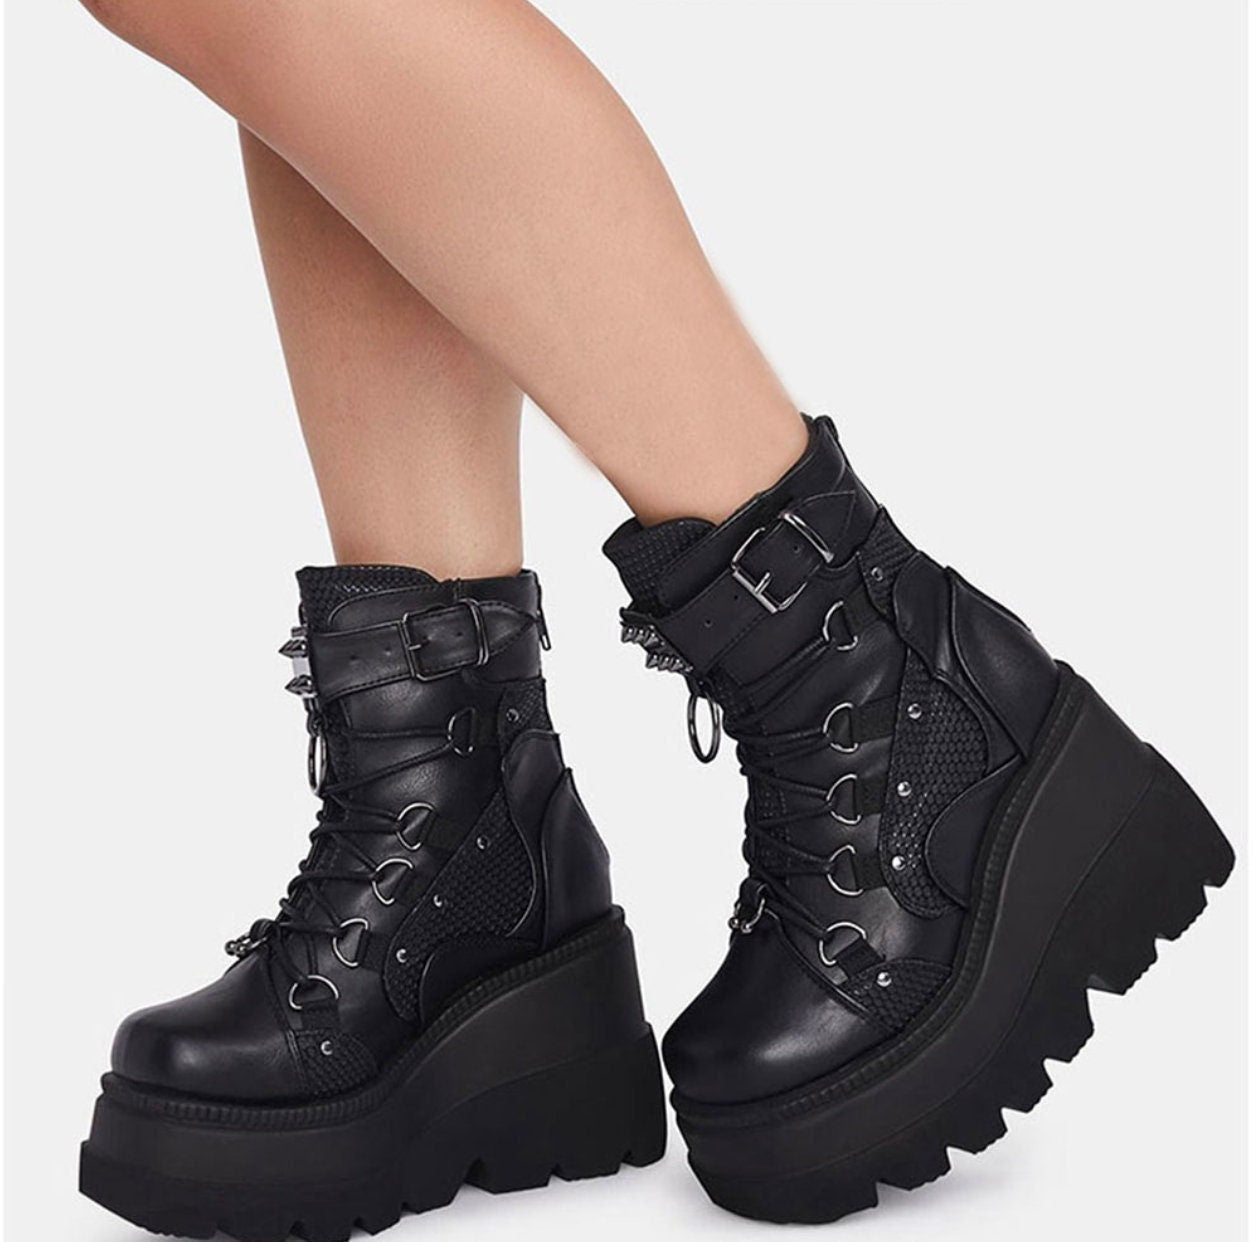 Large big chunky platforms goth shoe Punk Halloween Witch Cosplay Platform High Wedges Heels Black Gothic Calf Boots Women Shoes Big Size 43 # 34